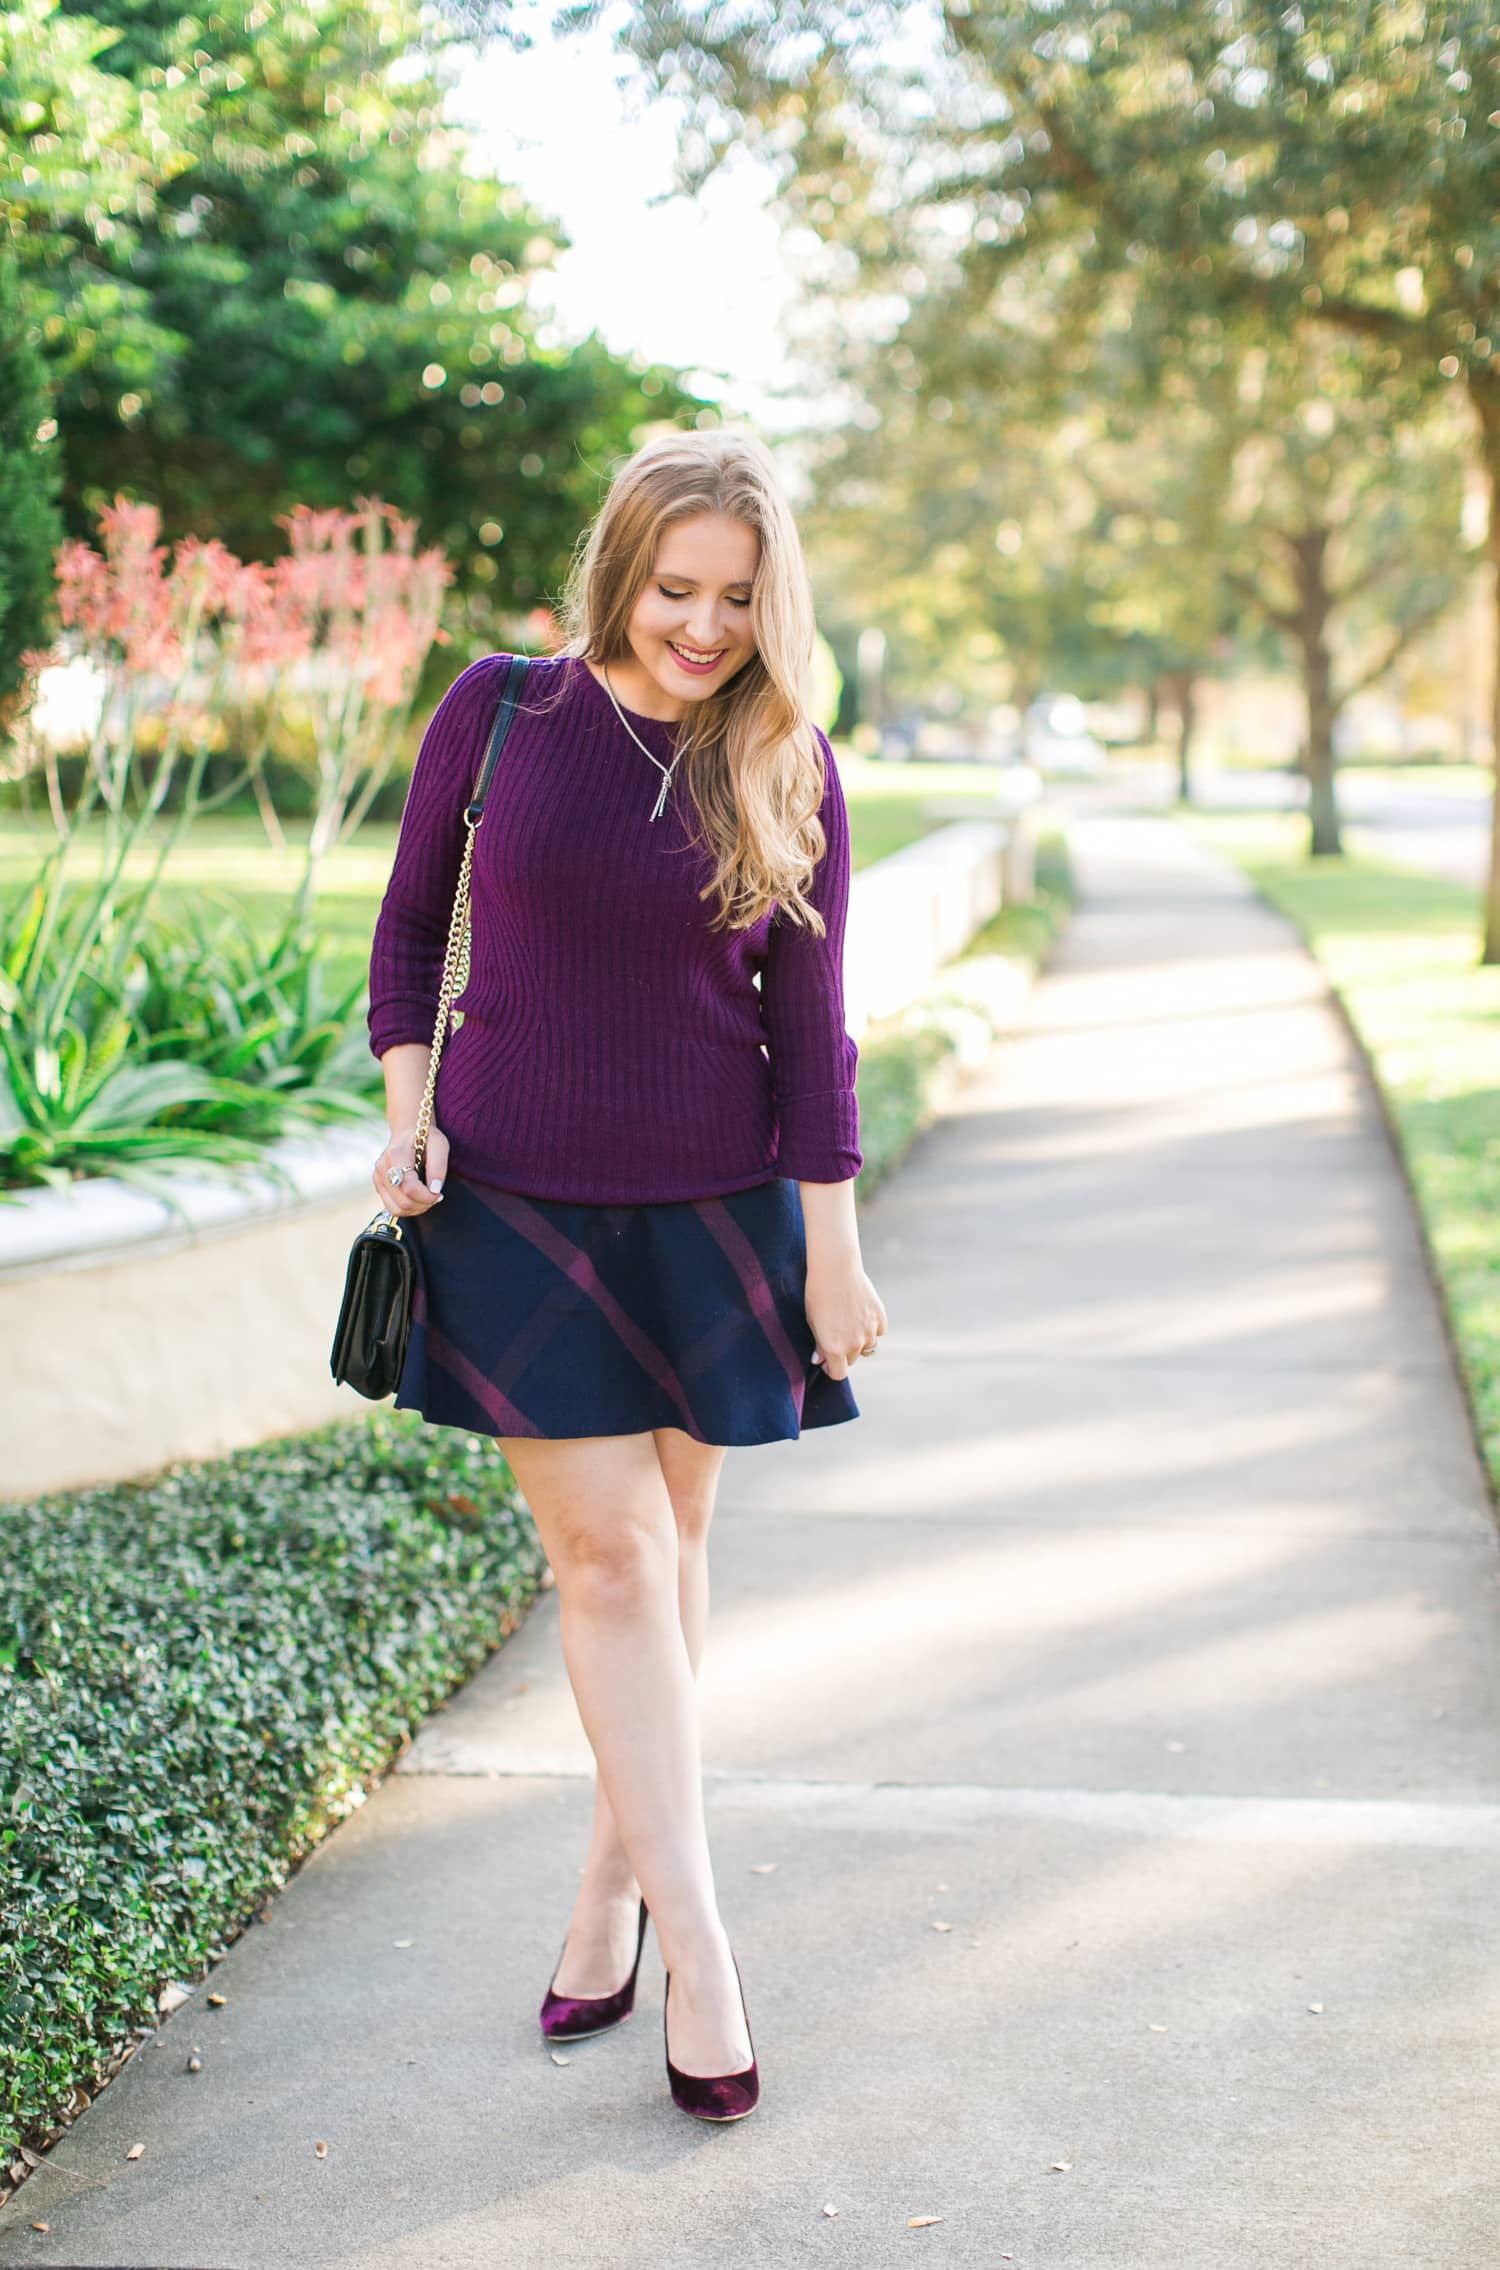 Burgundy sweater, navy and pink plaid skirt, Rebecca Minkoff black quilted handbag, Sam Edelman burgundy velvet pumps, and Phillip Gavriel jewelry styled in a preppy outfit idea by Florida fashion and personal style blogger Ashley Brooke Nicholas | preppy style, preppy fashion, affordable outfit ideas, cute outfits, cute outfit idea